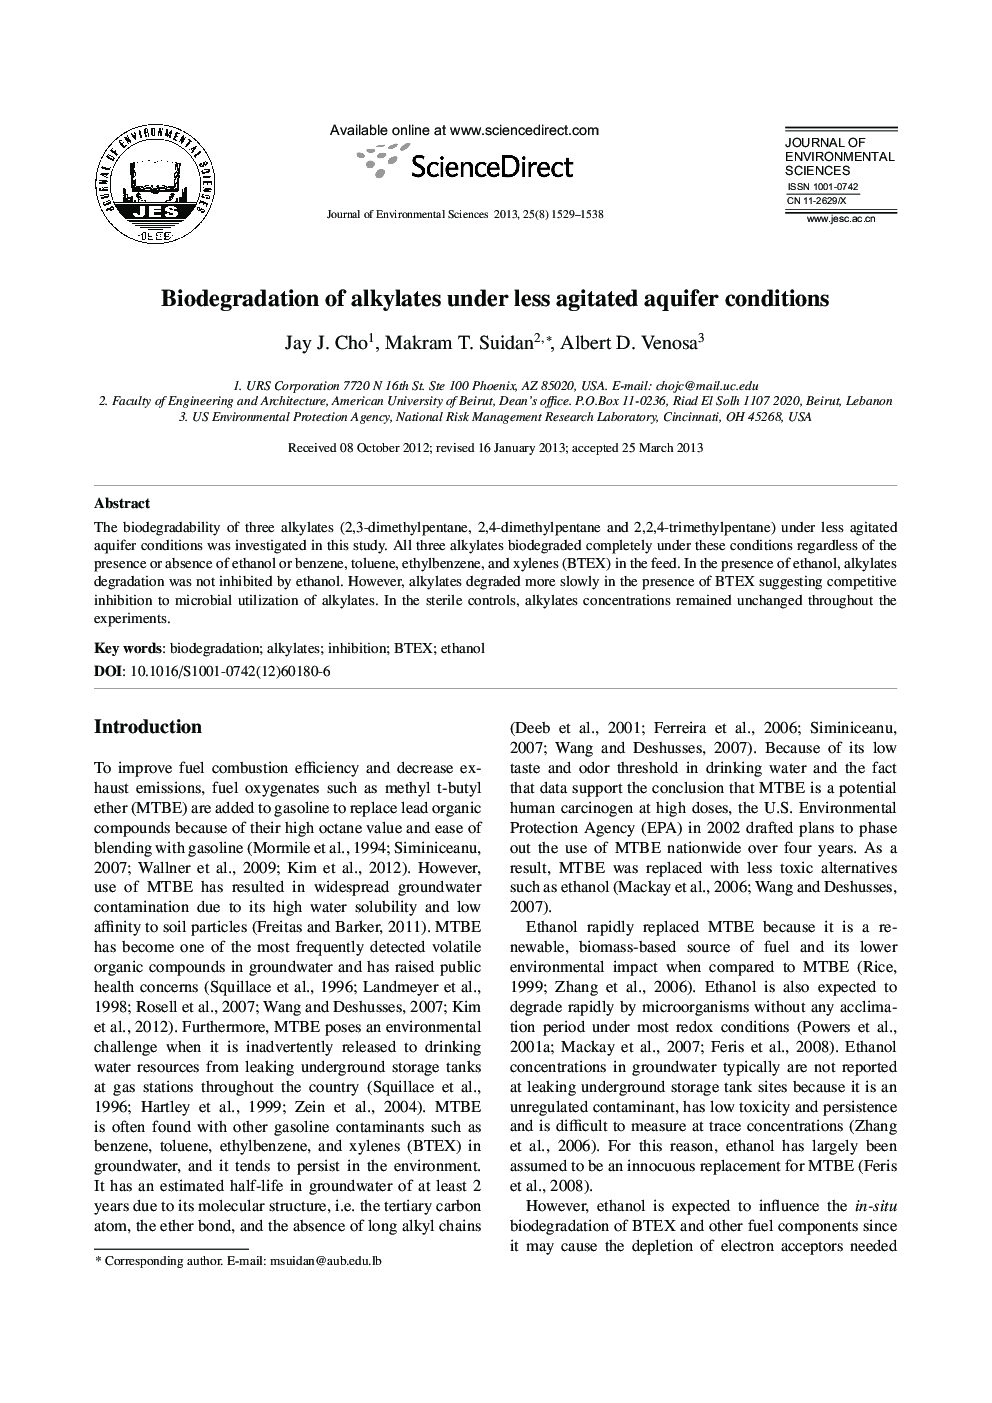 Biodegradation of alkylates under less agitated aquifer conditions